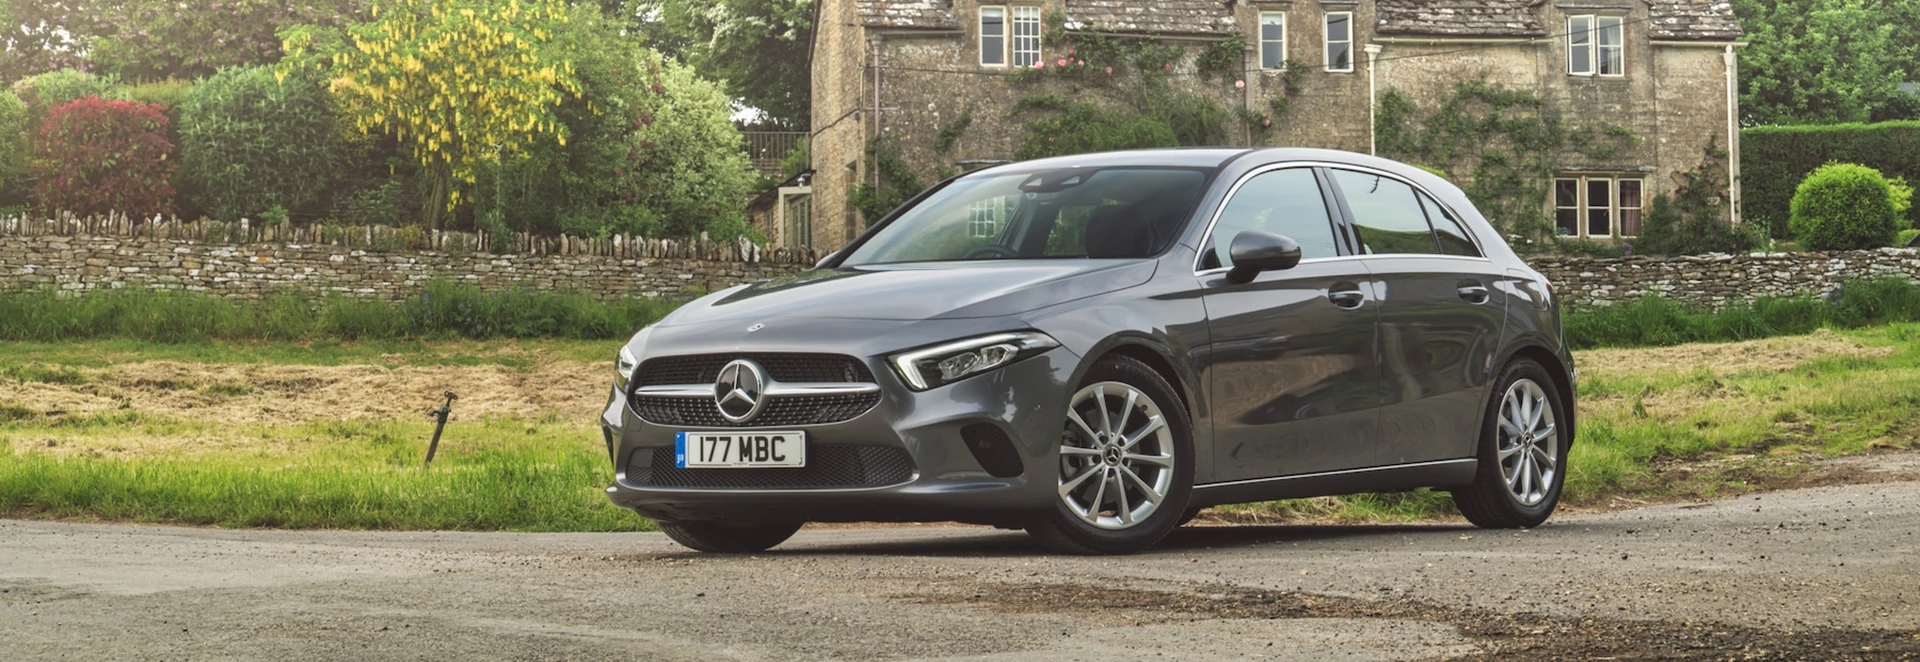 Buyer’s guide to the Mercedes-Benz A-Class